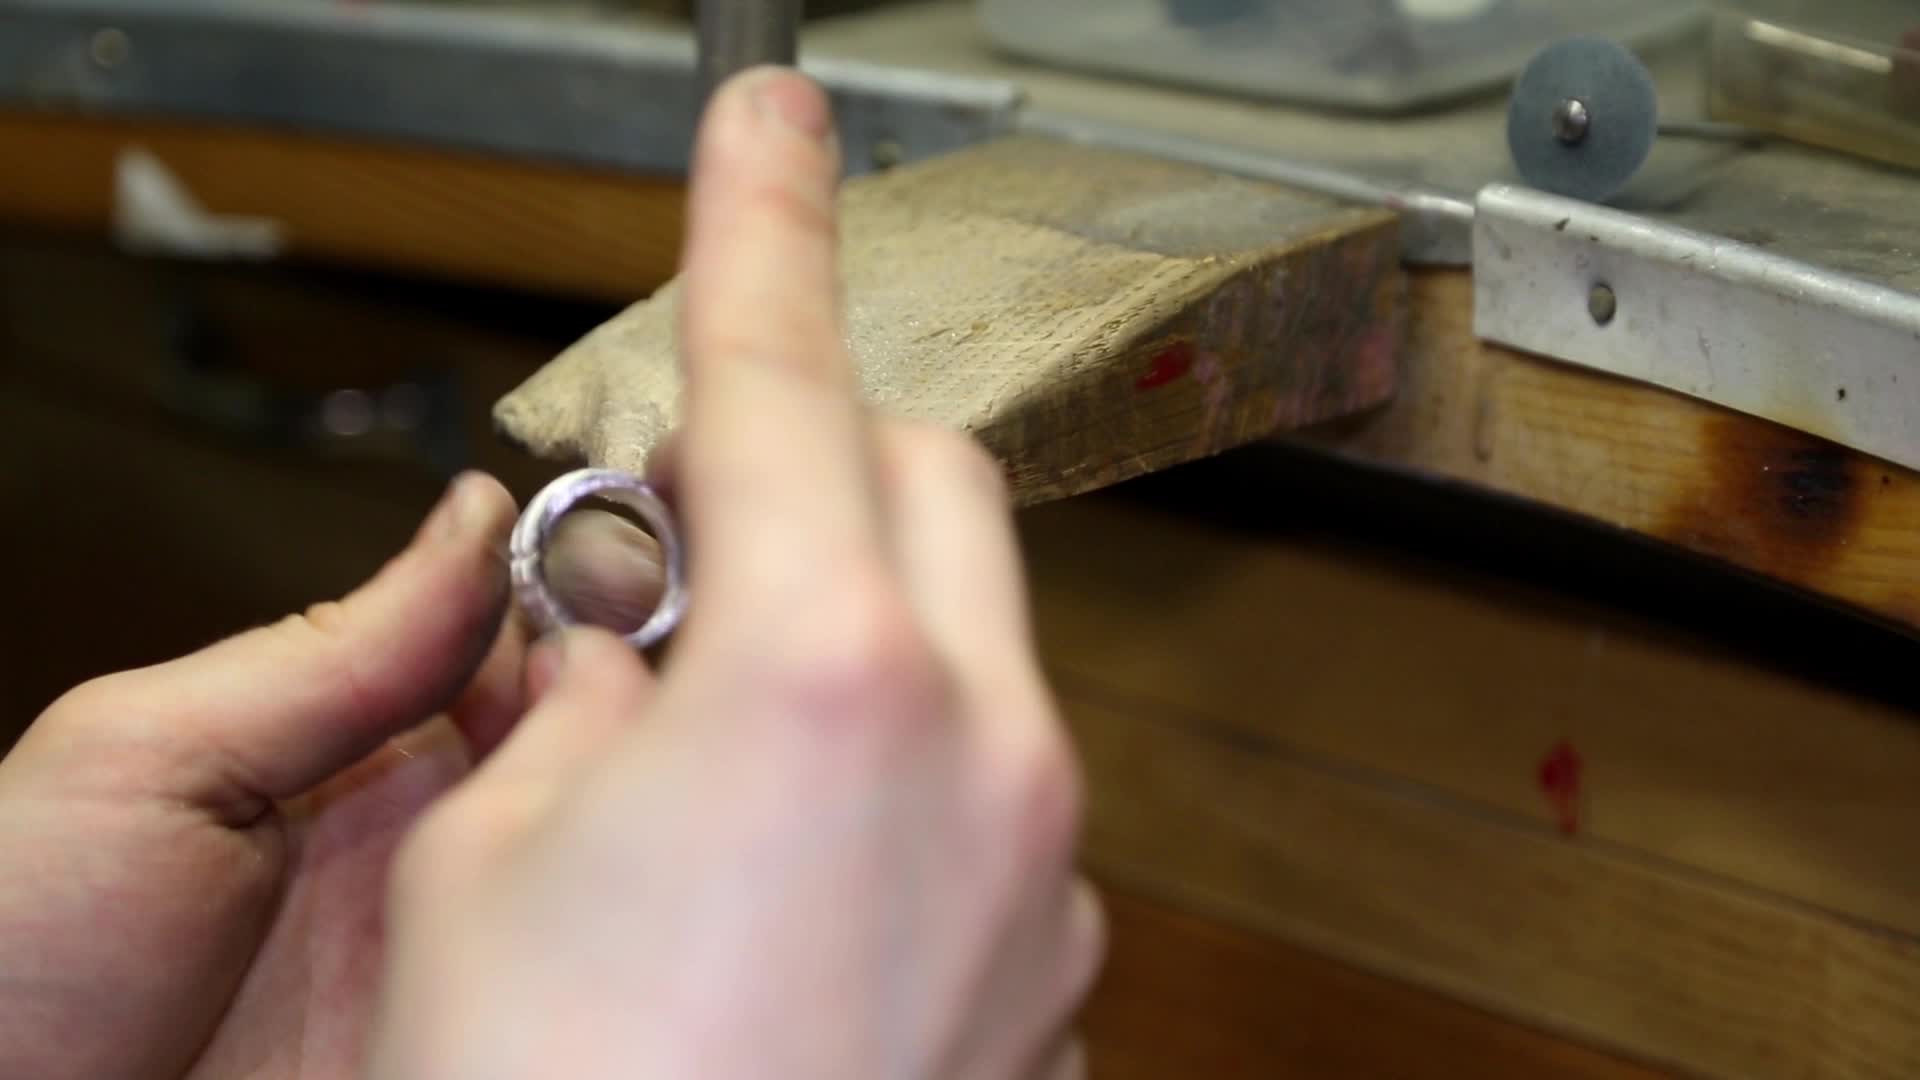 Jewellery Making - Filing a Ring Close Up